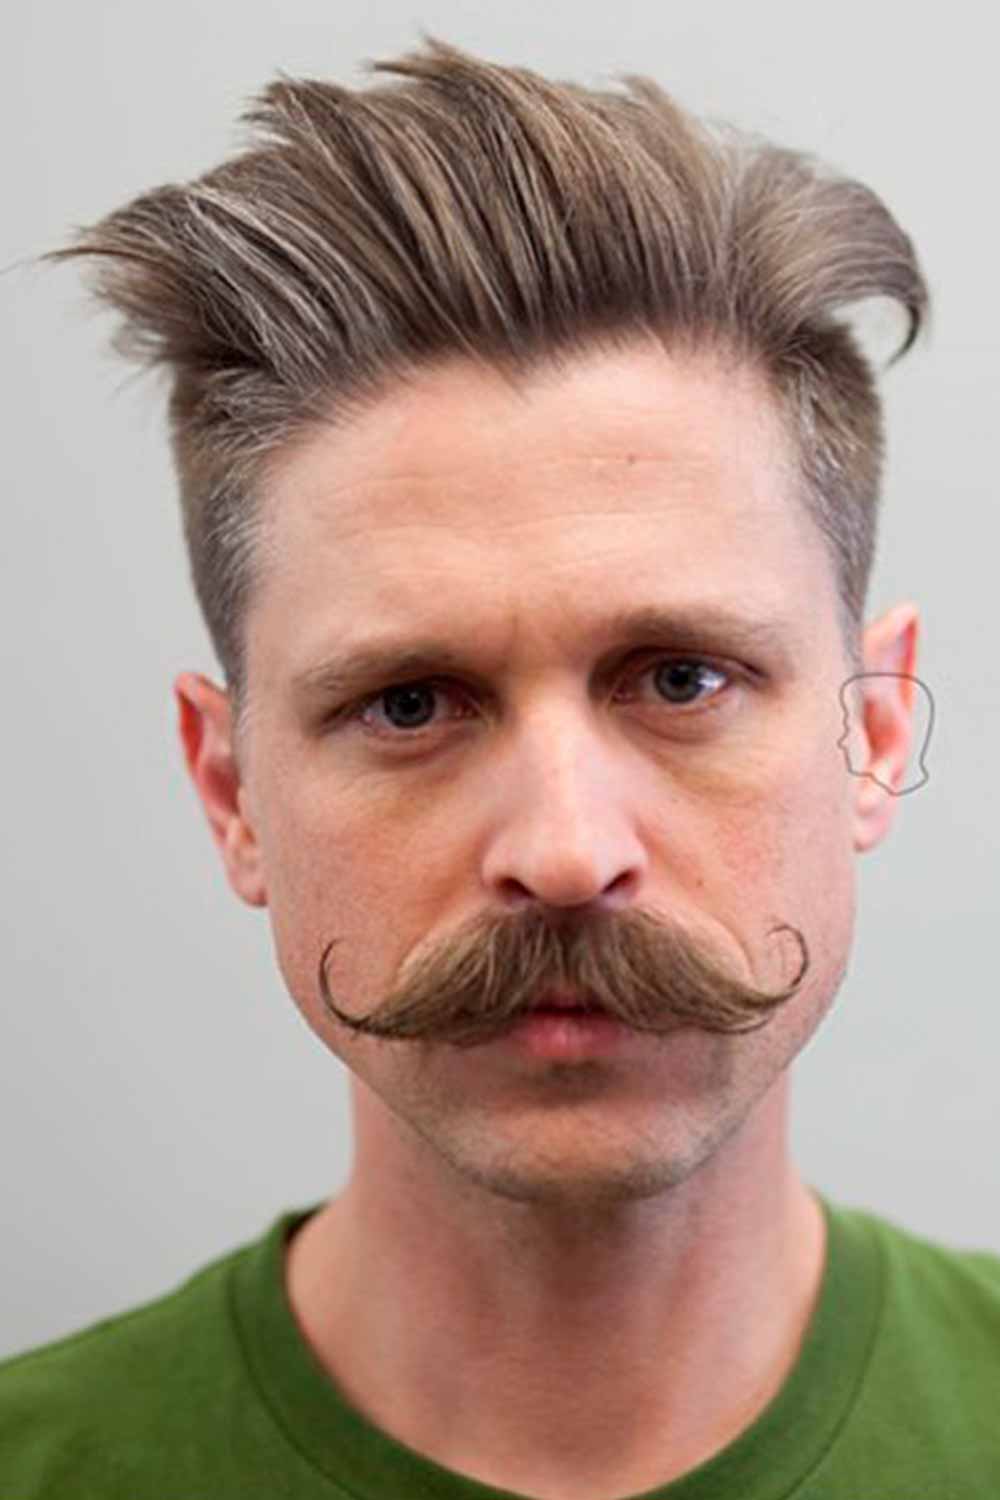 Imperial Mustache #mustache #moustache #mustachestyles #mustaches